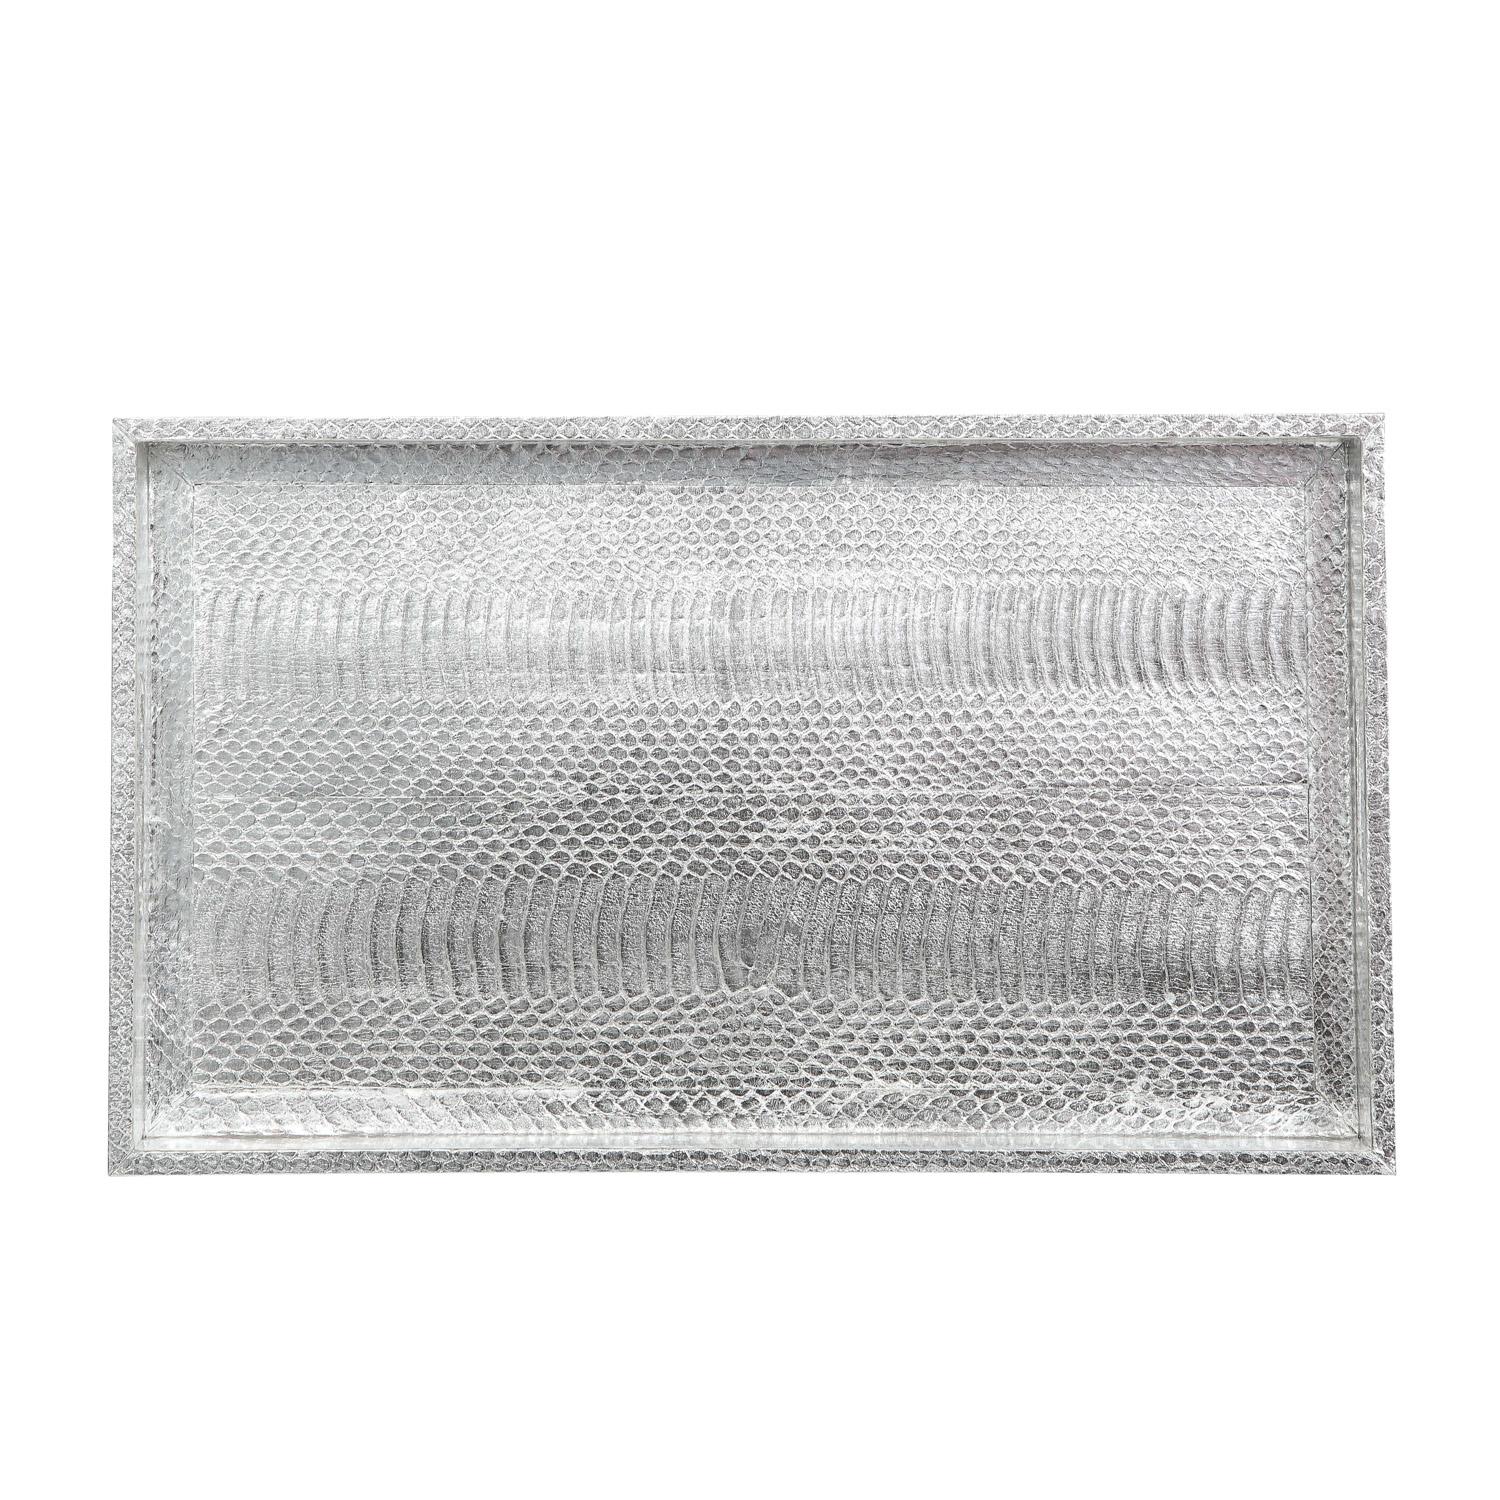 Hand-Crafted Lobel Originals Tray in Silver Python, New For Sale